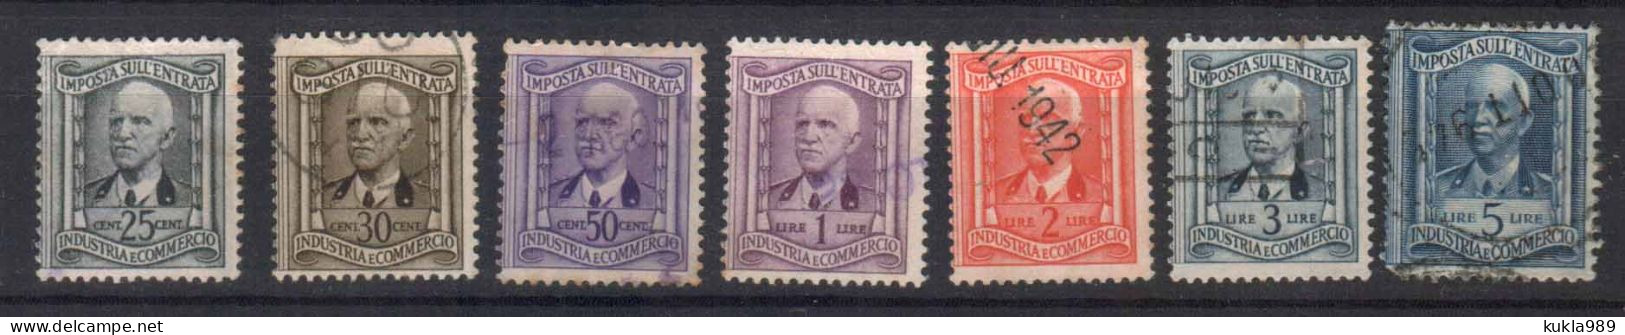 ITALY , C.1940s FISCAL REVENUE TAX 7 STAMPS - Revenue Stamps